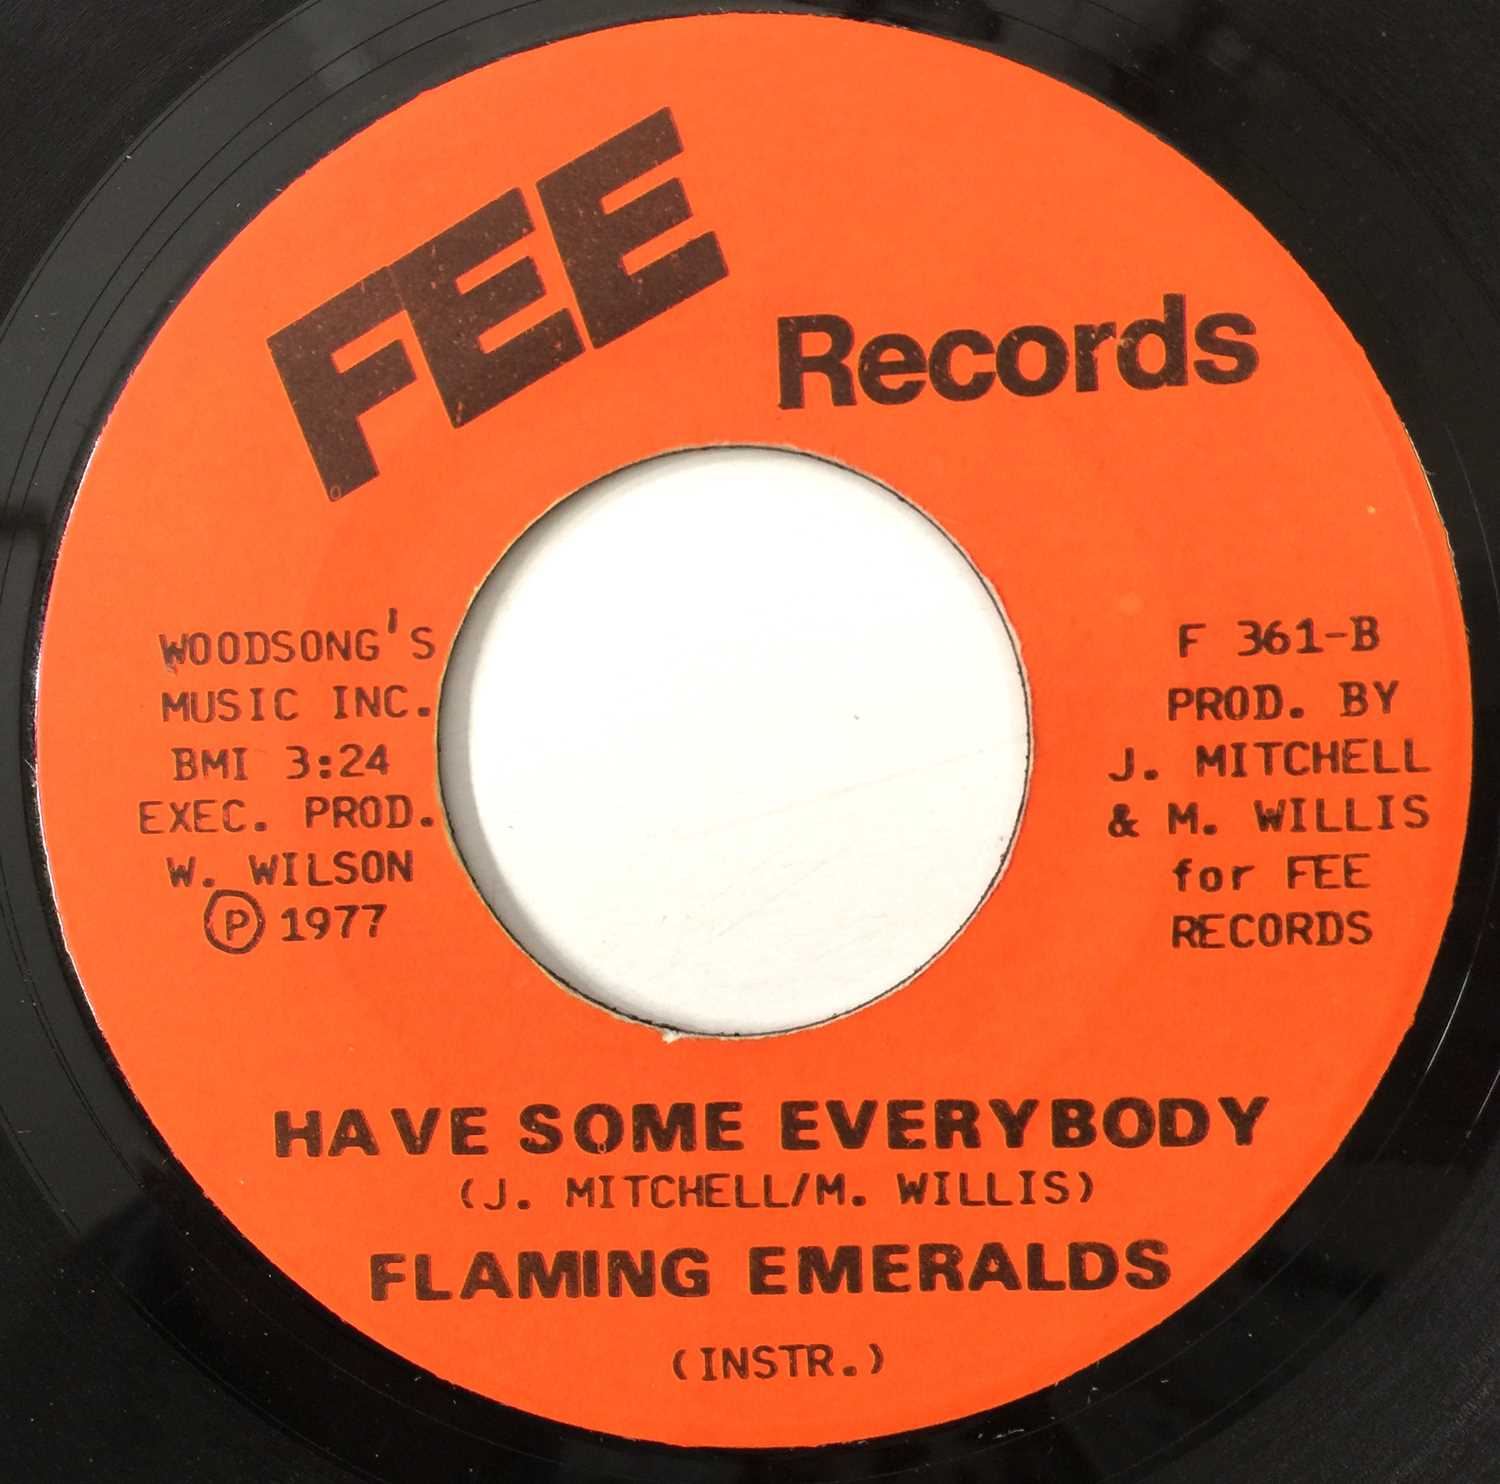 FLAMING EMERALDS - HAVE SOME EVERYBODY 7" (US STOCK - FEE RECORDS - F361) - Image 2 of 2